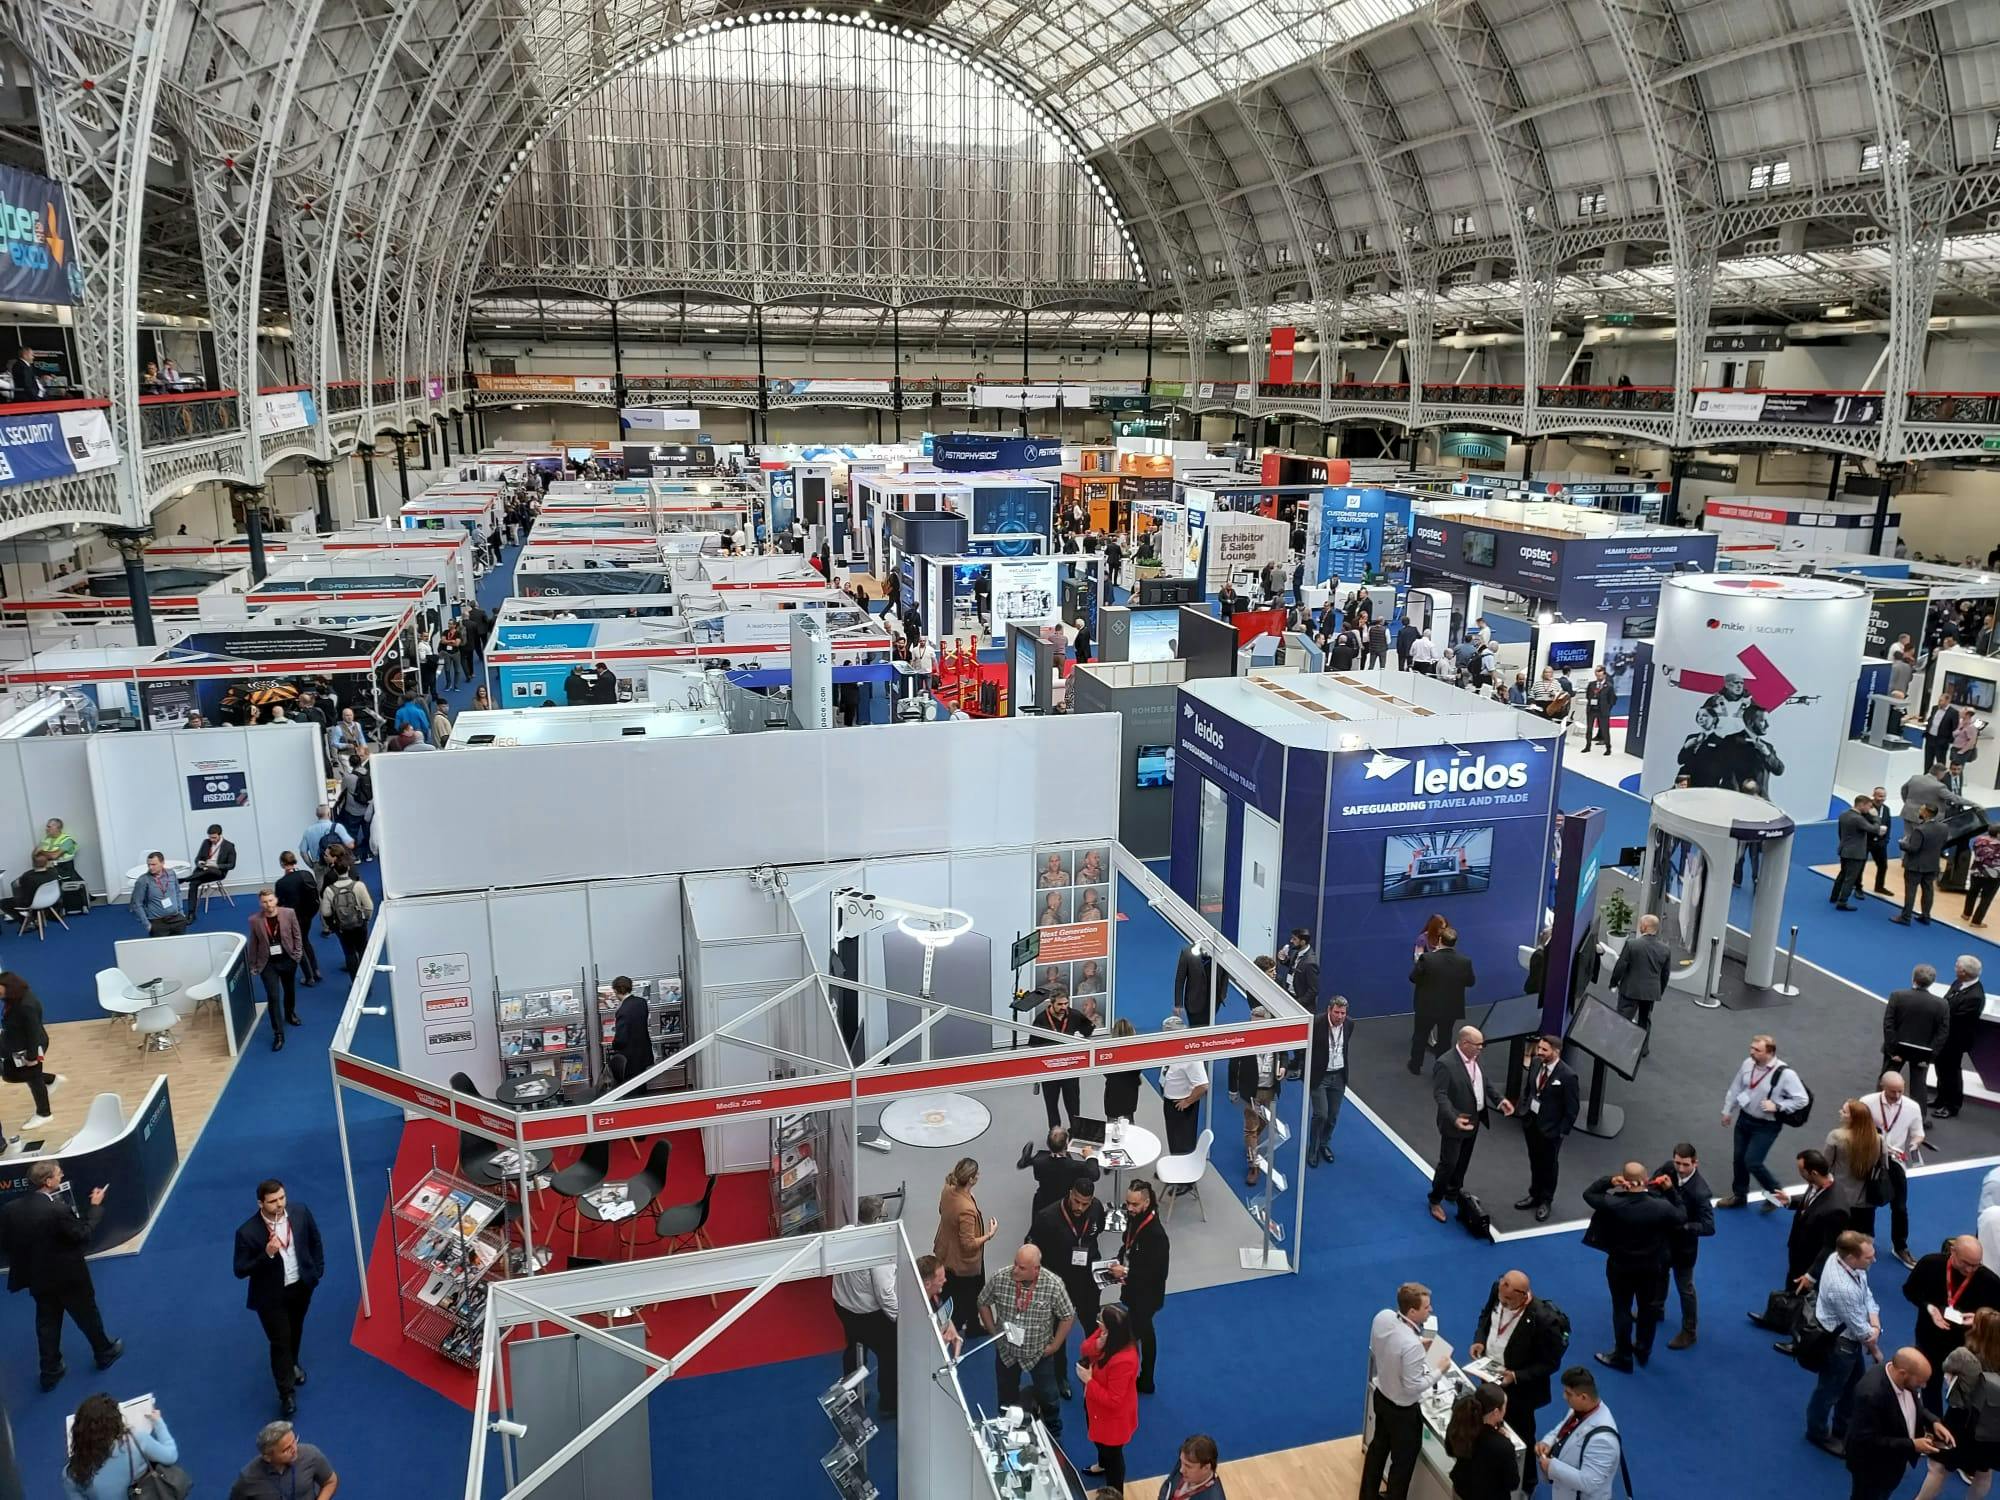 Participation at the international security expo